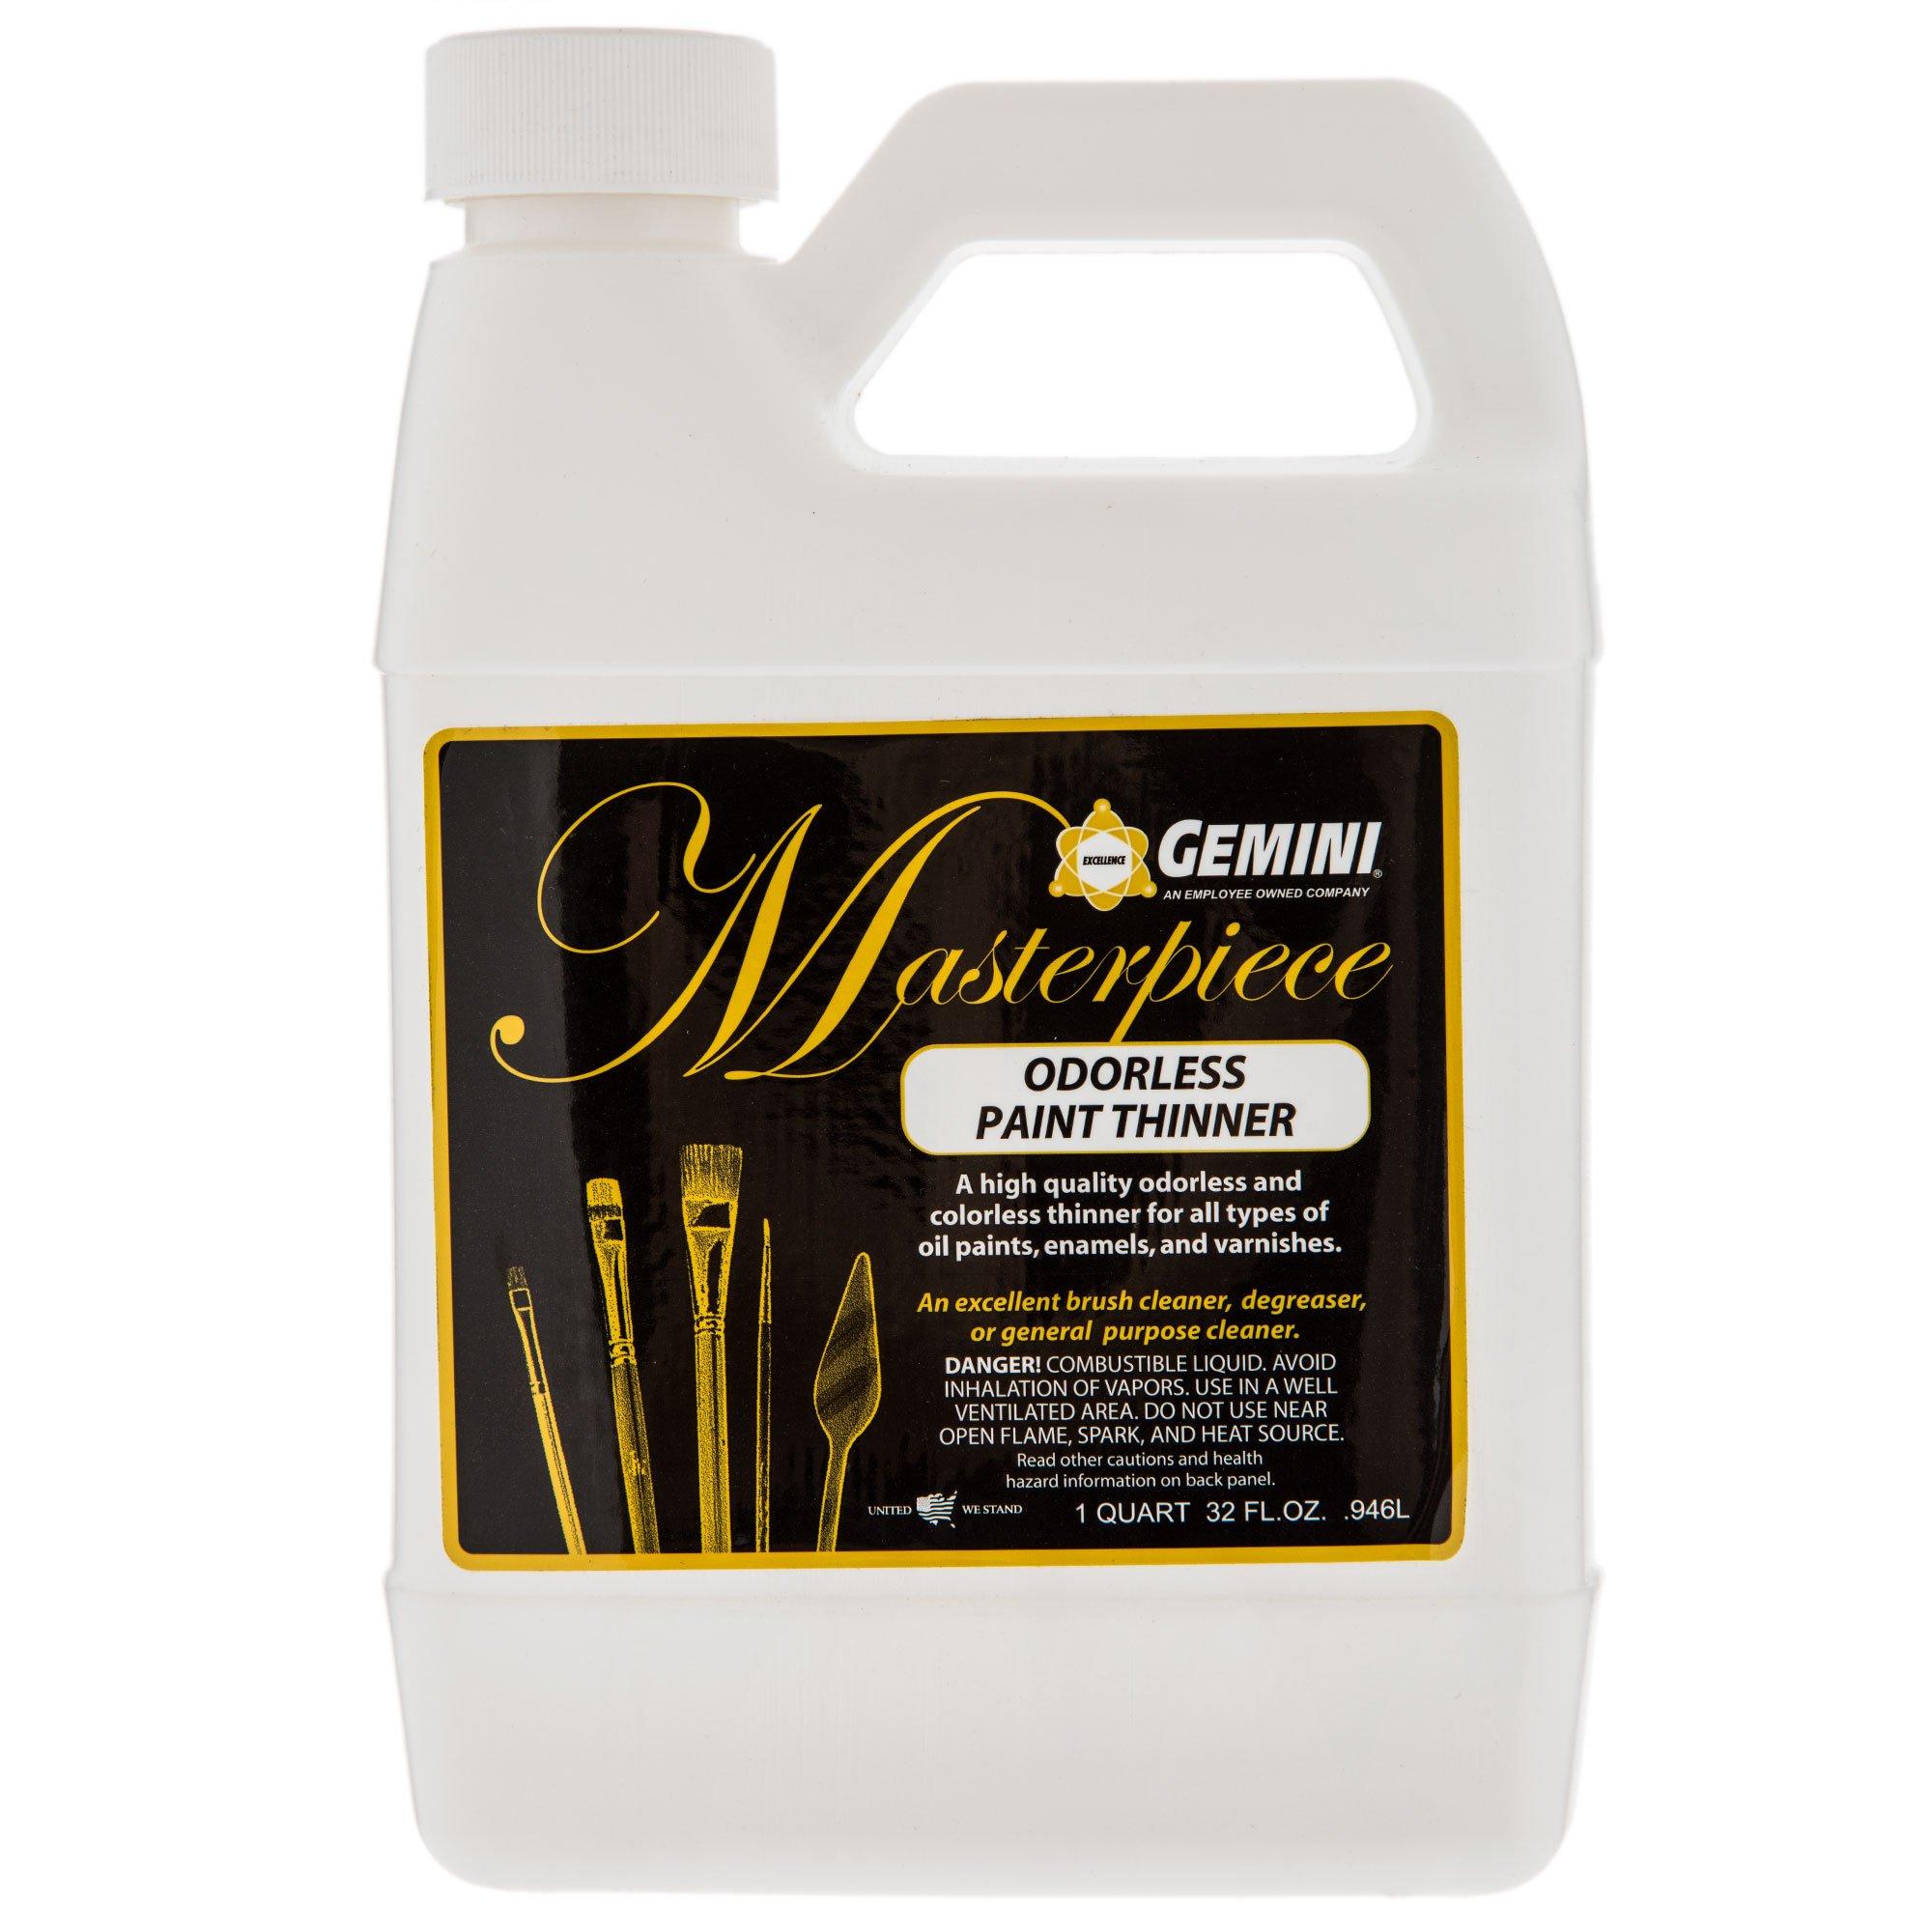 Review – Masterpiece Odorless Paint Thinner